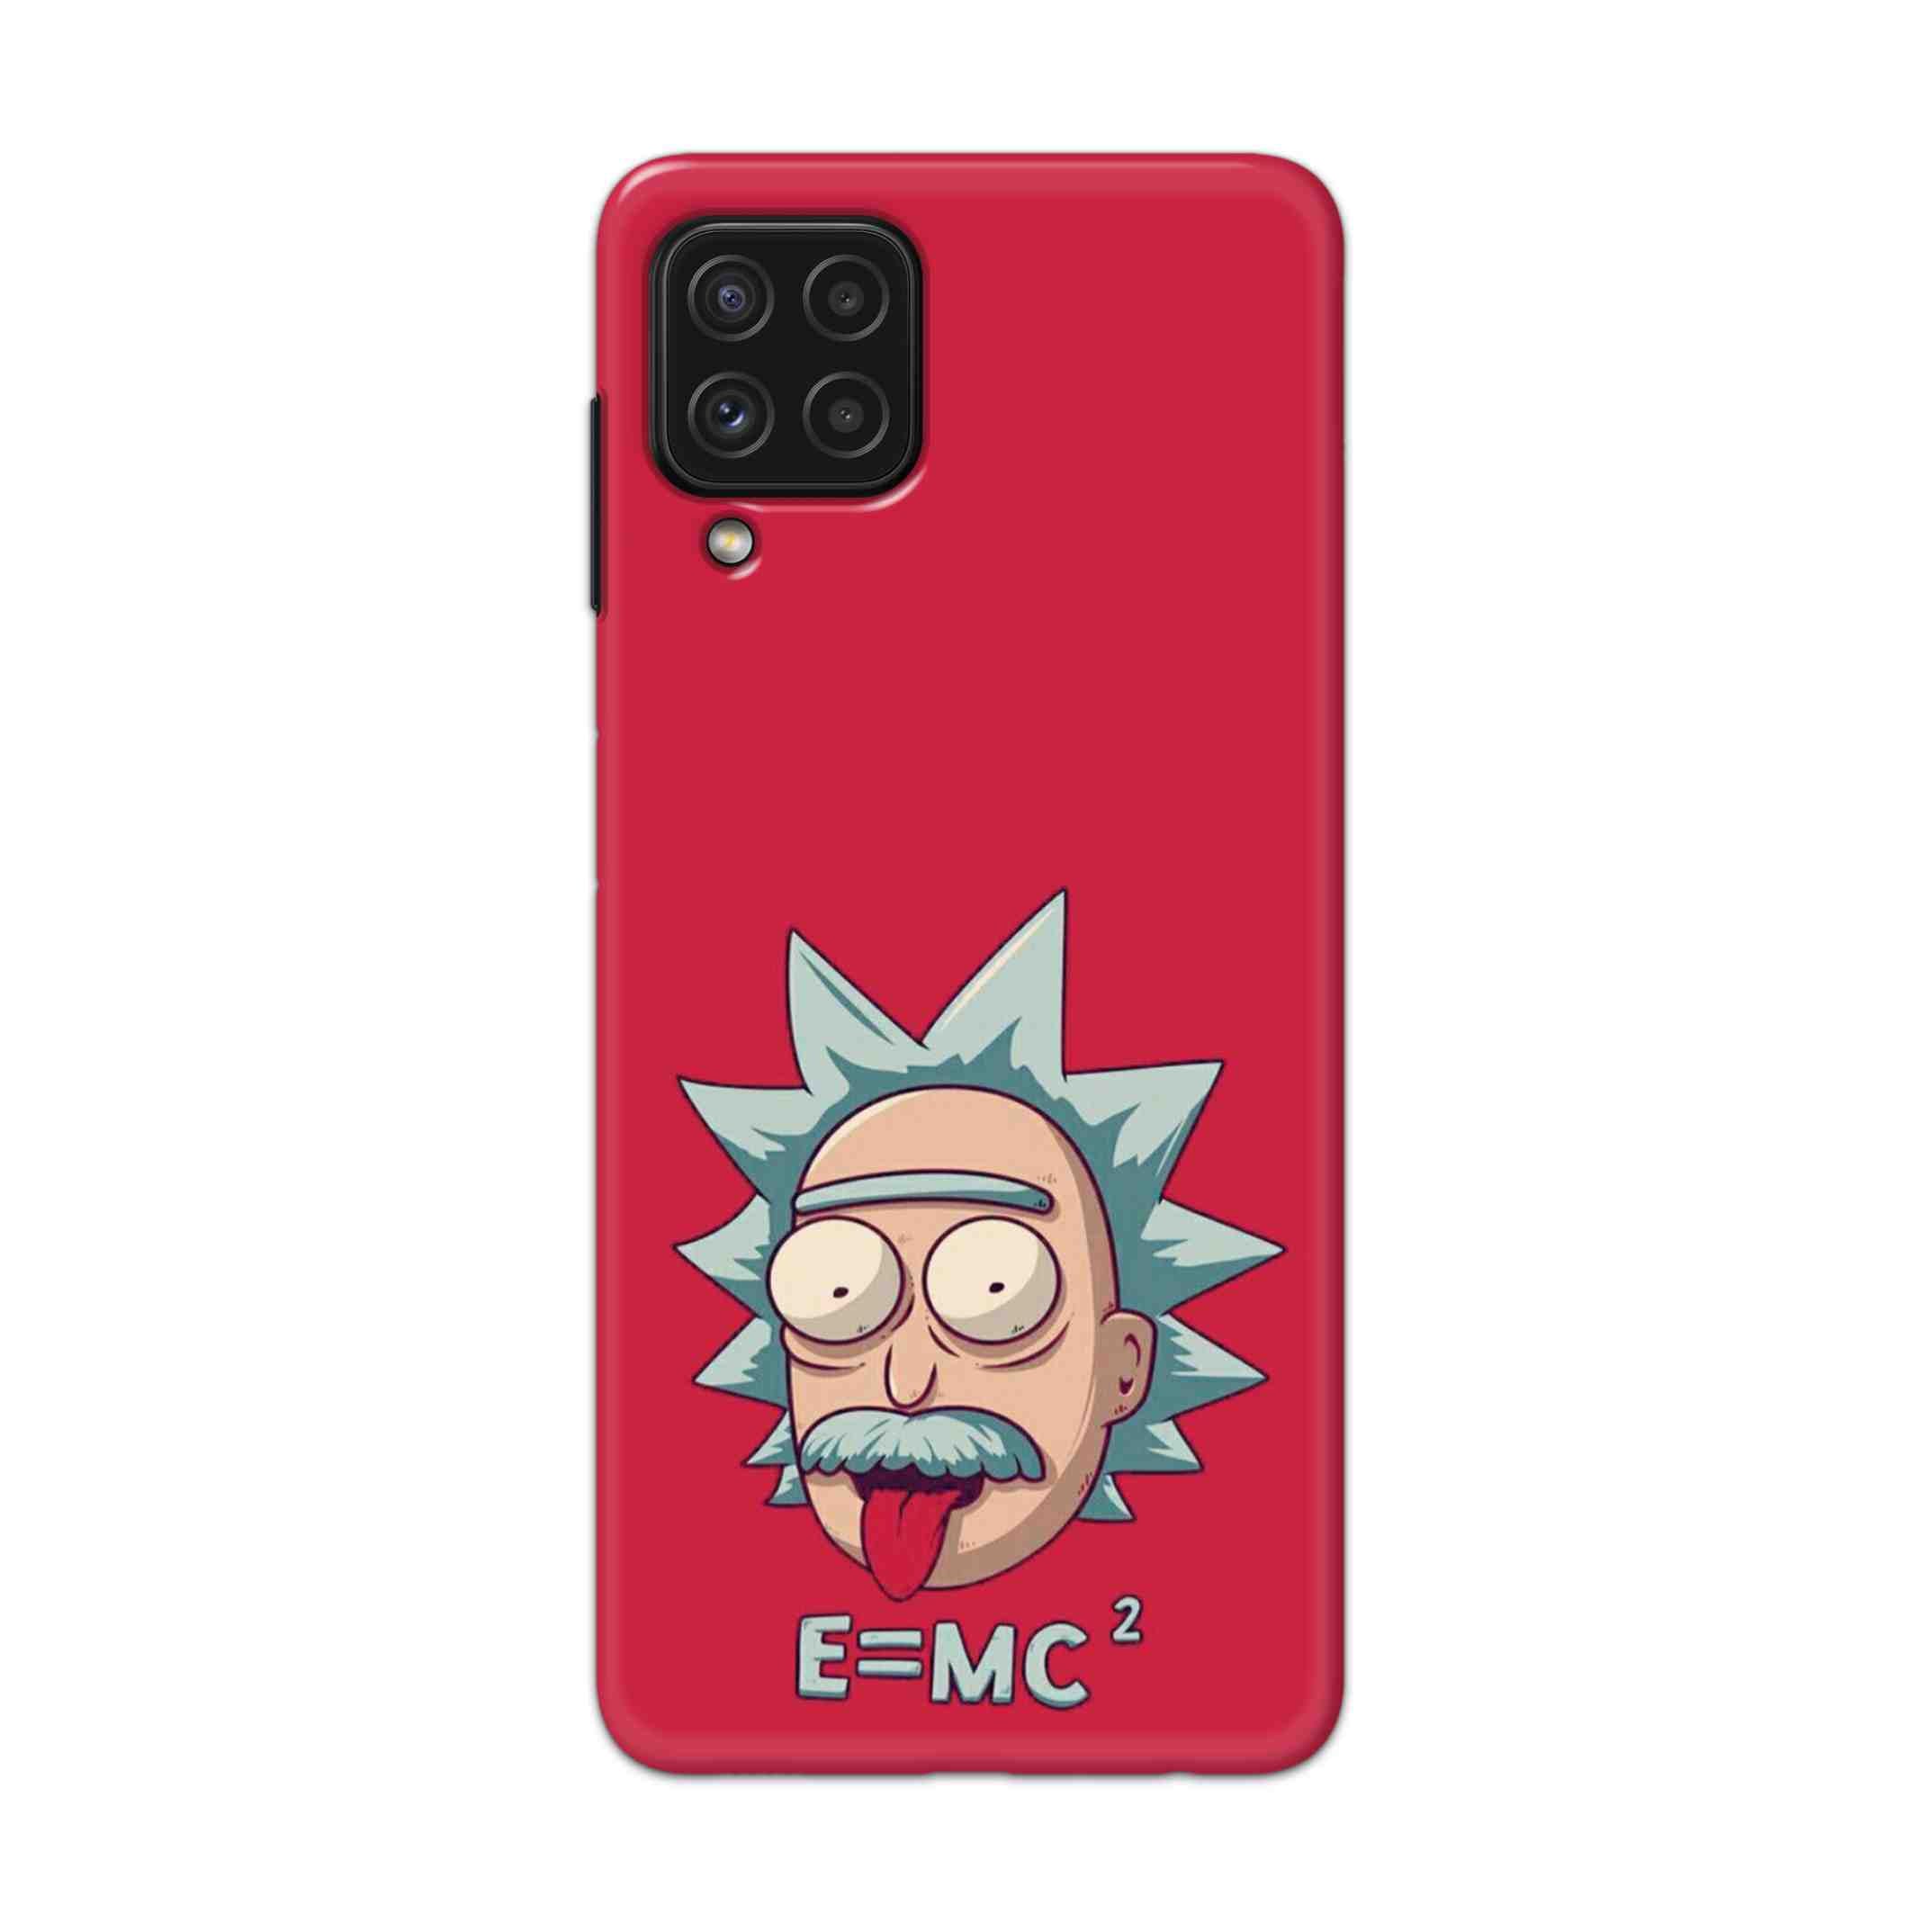 Buy E=Mc Hard Back Mobile Phone Case Cover For Samsung Galaxy A22 Online